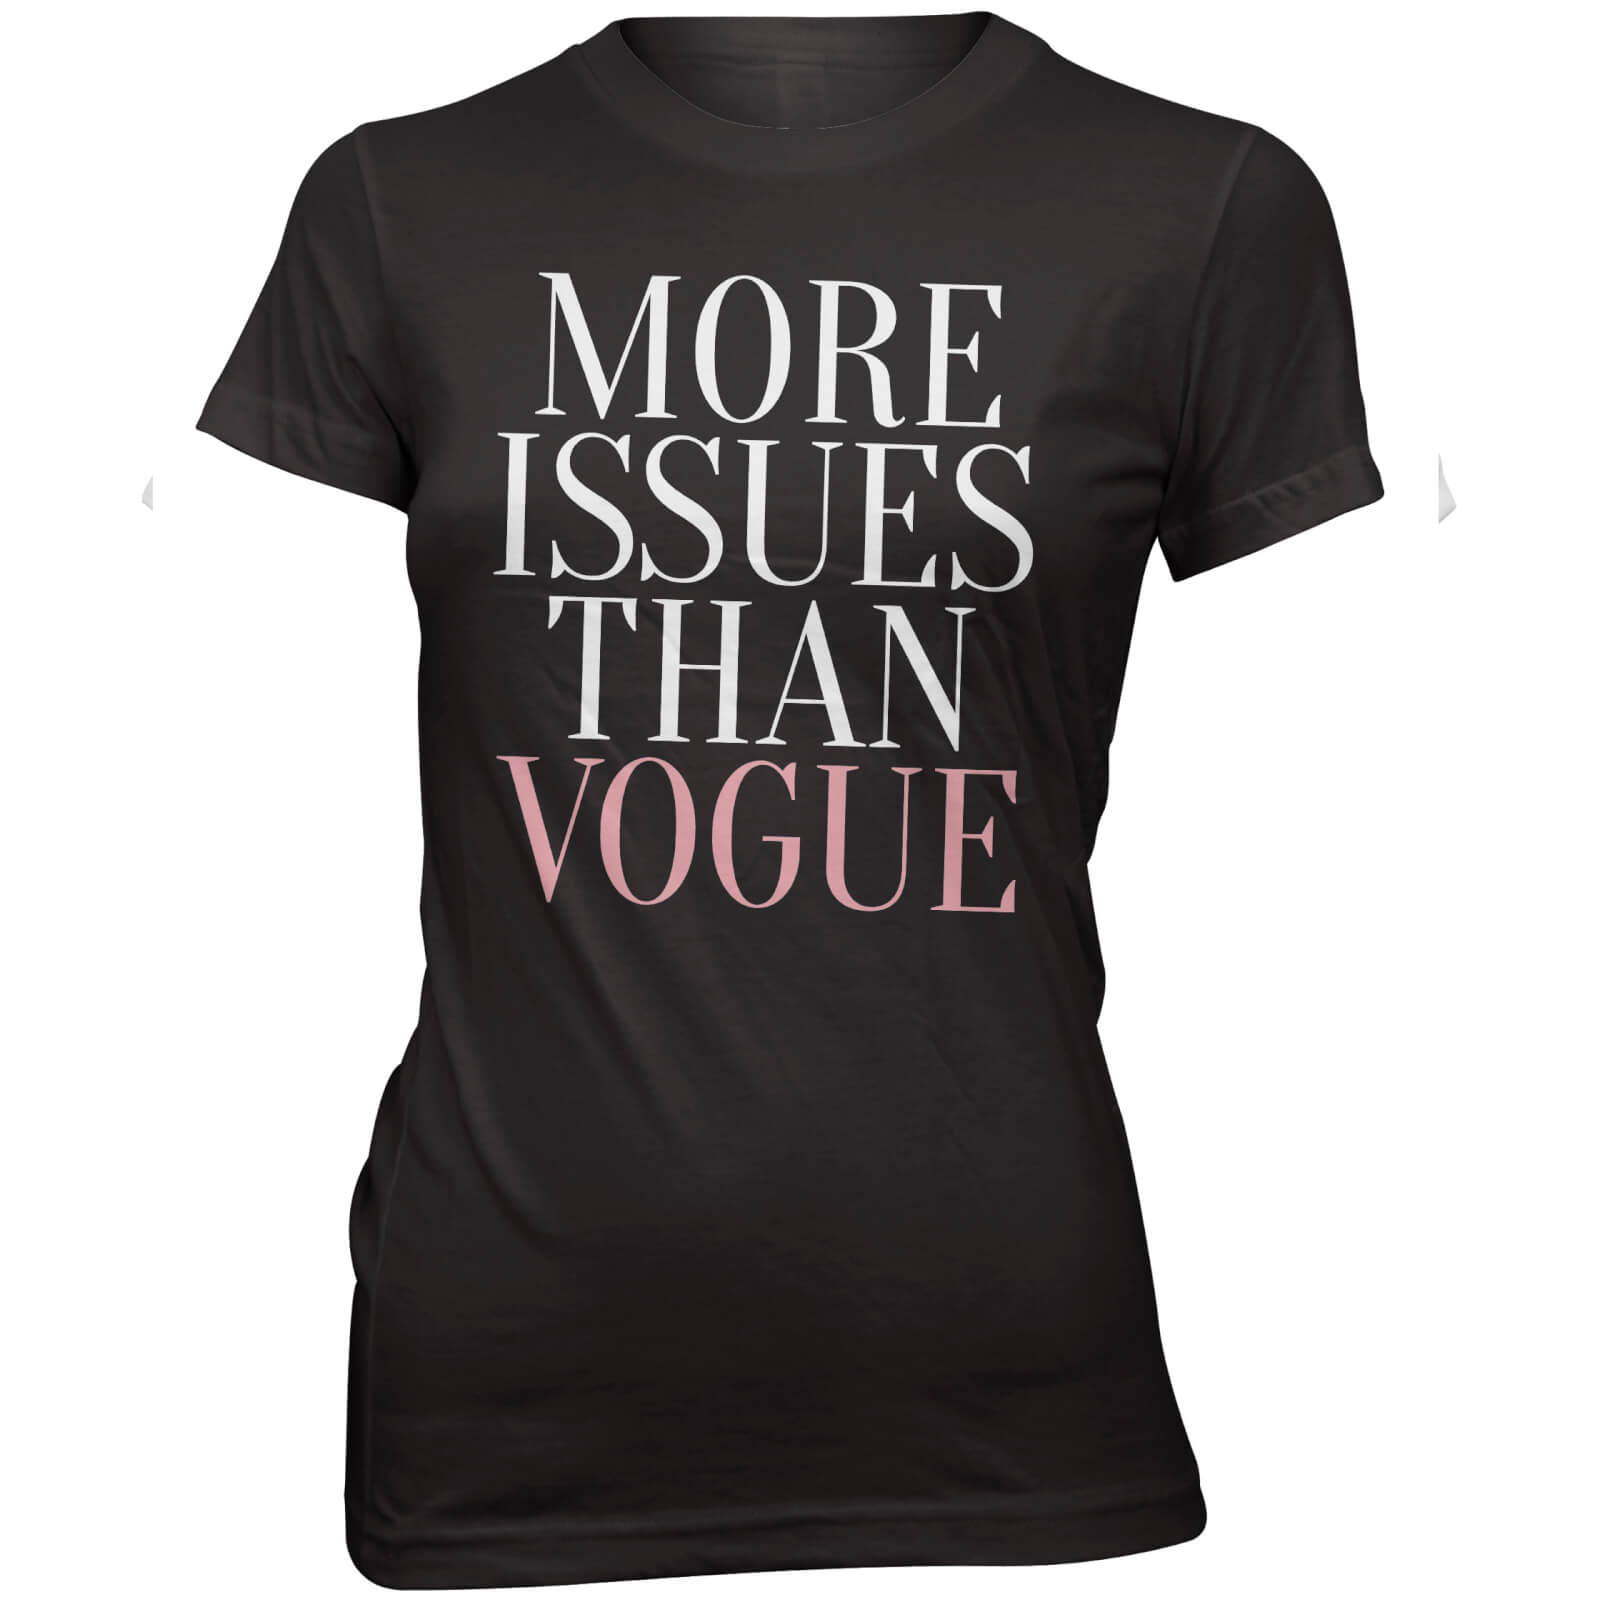 More Issues Than Vogue Women's Slogan T-Shirt - S